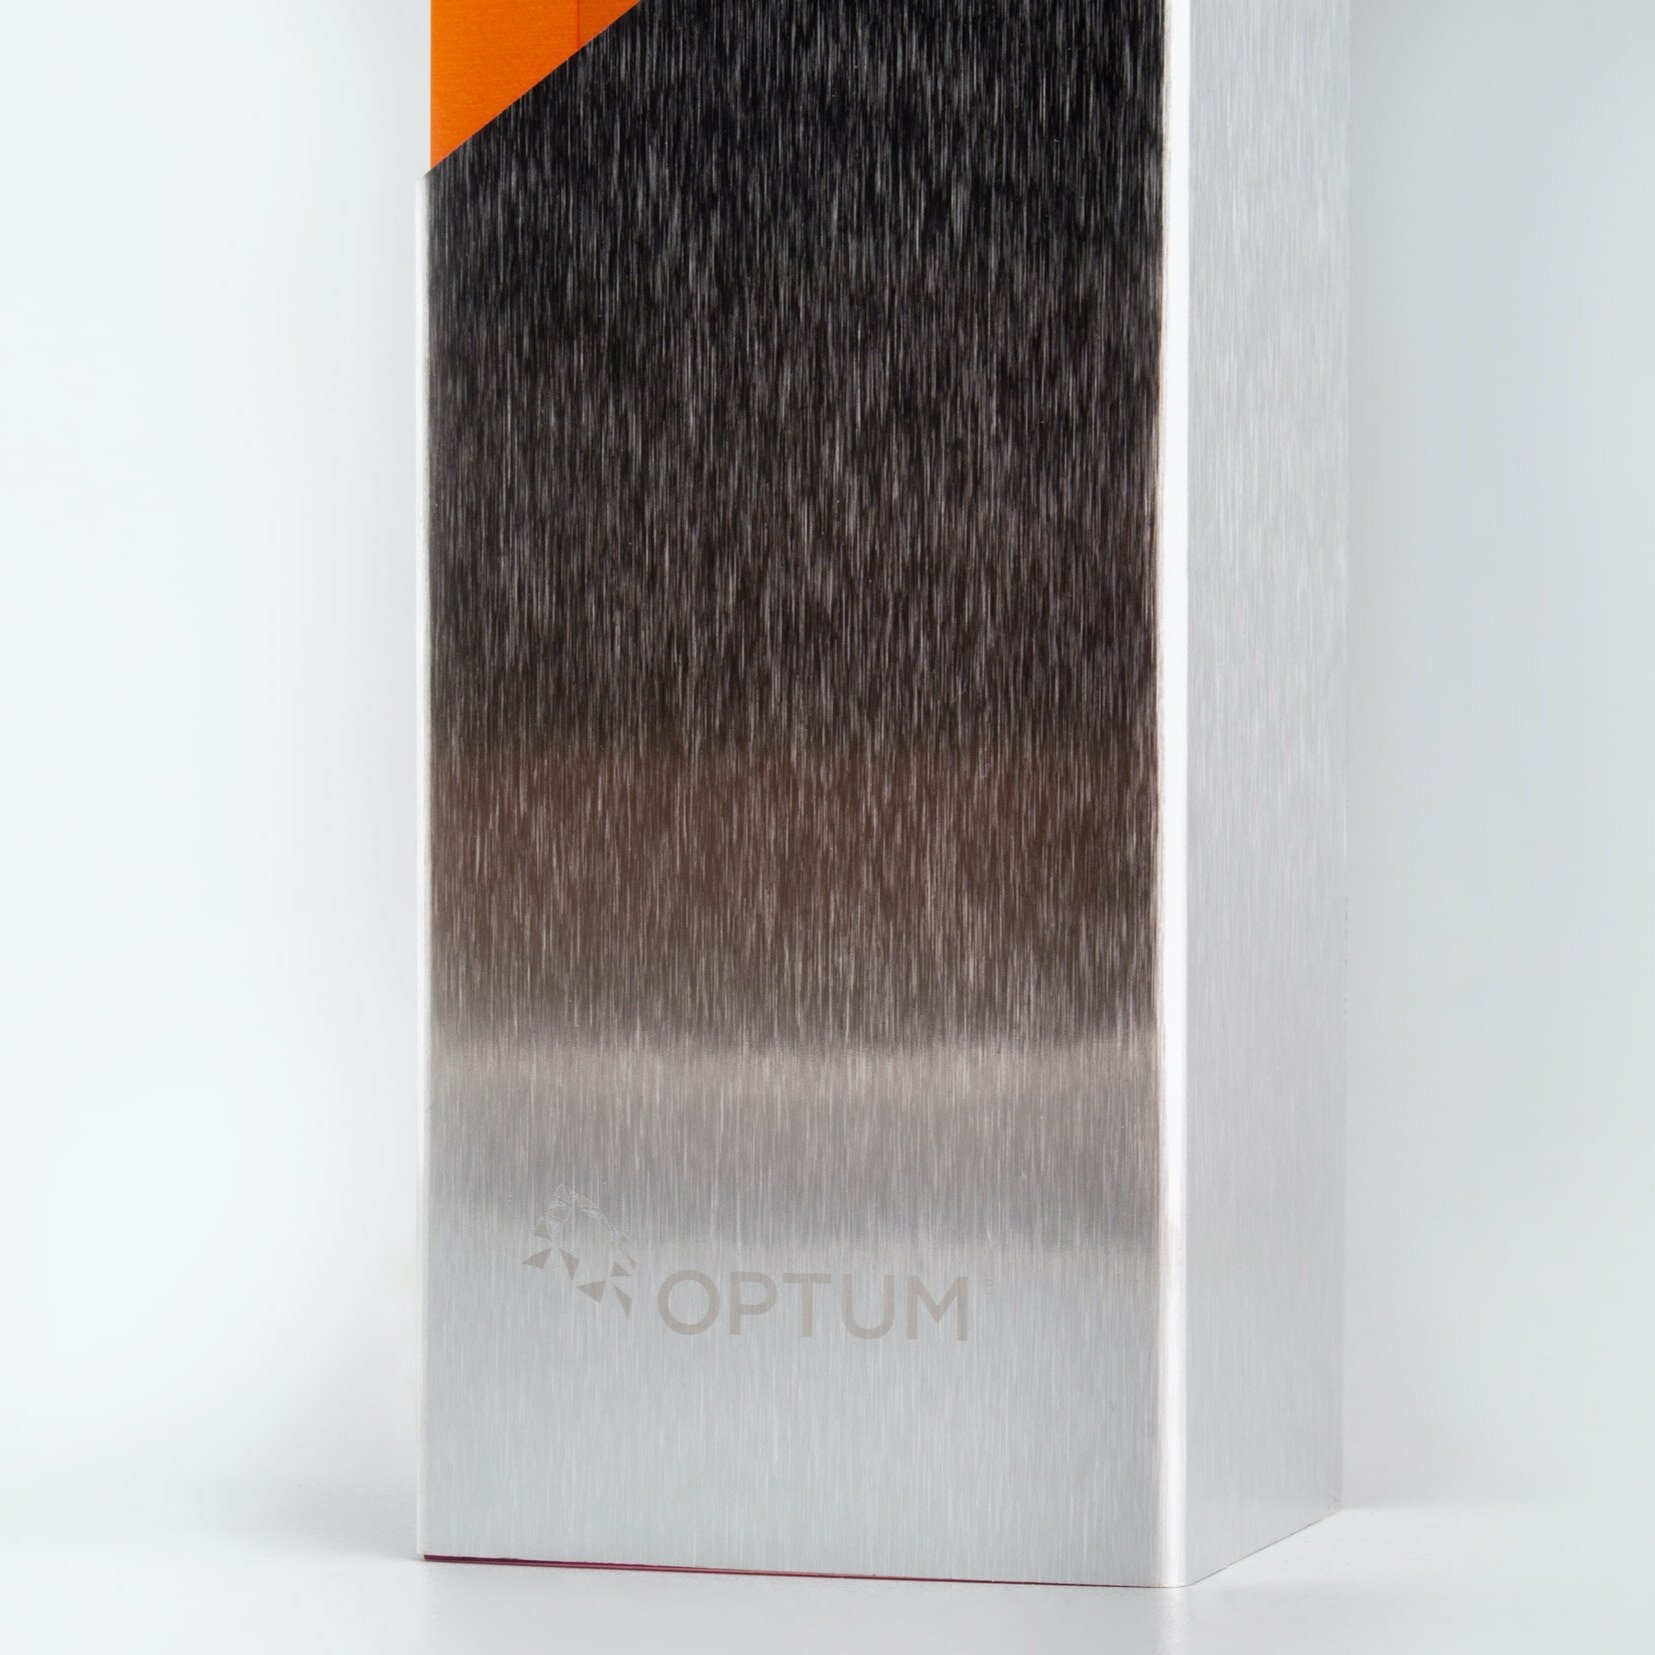 optum+inspiration+in+healthcare+awards+acrylic+and+brushed+metal+9.jpg